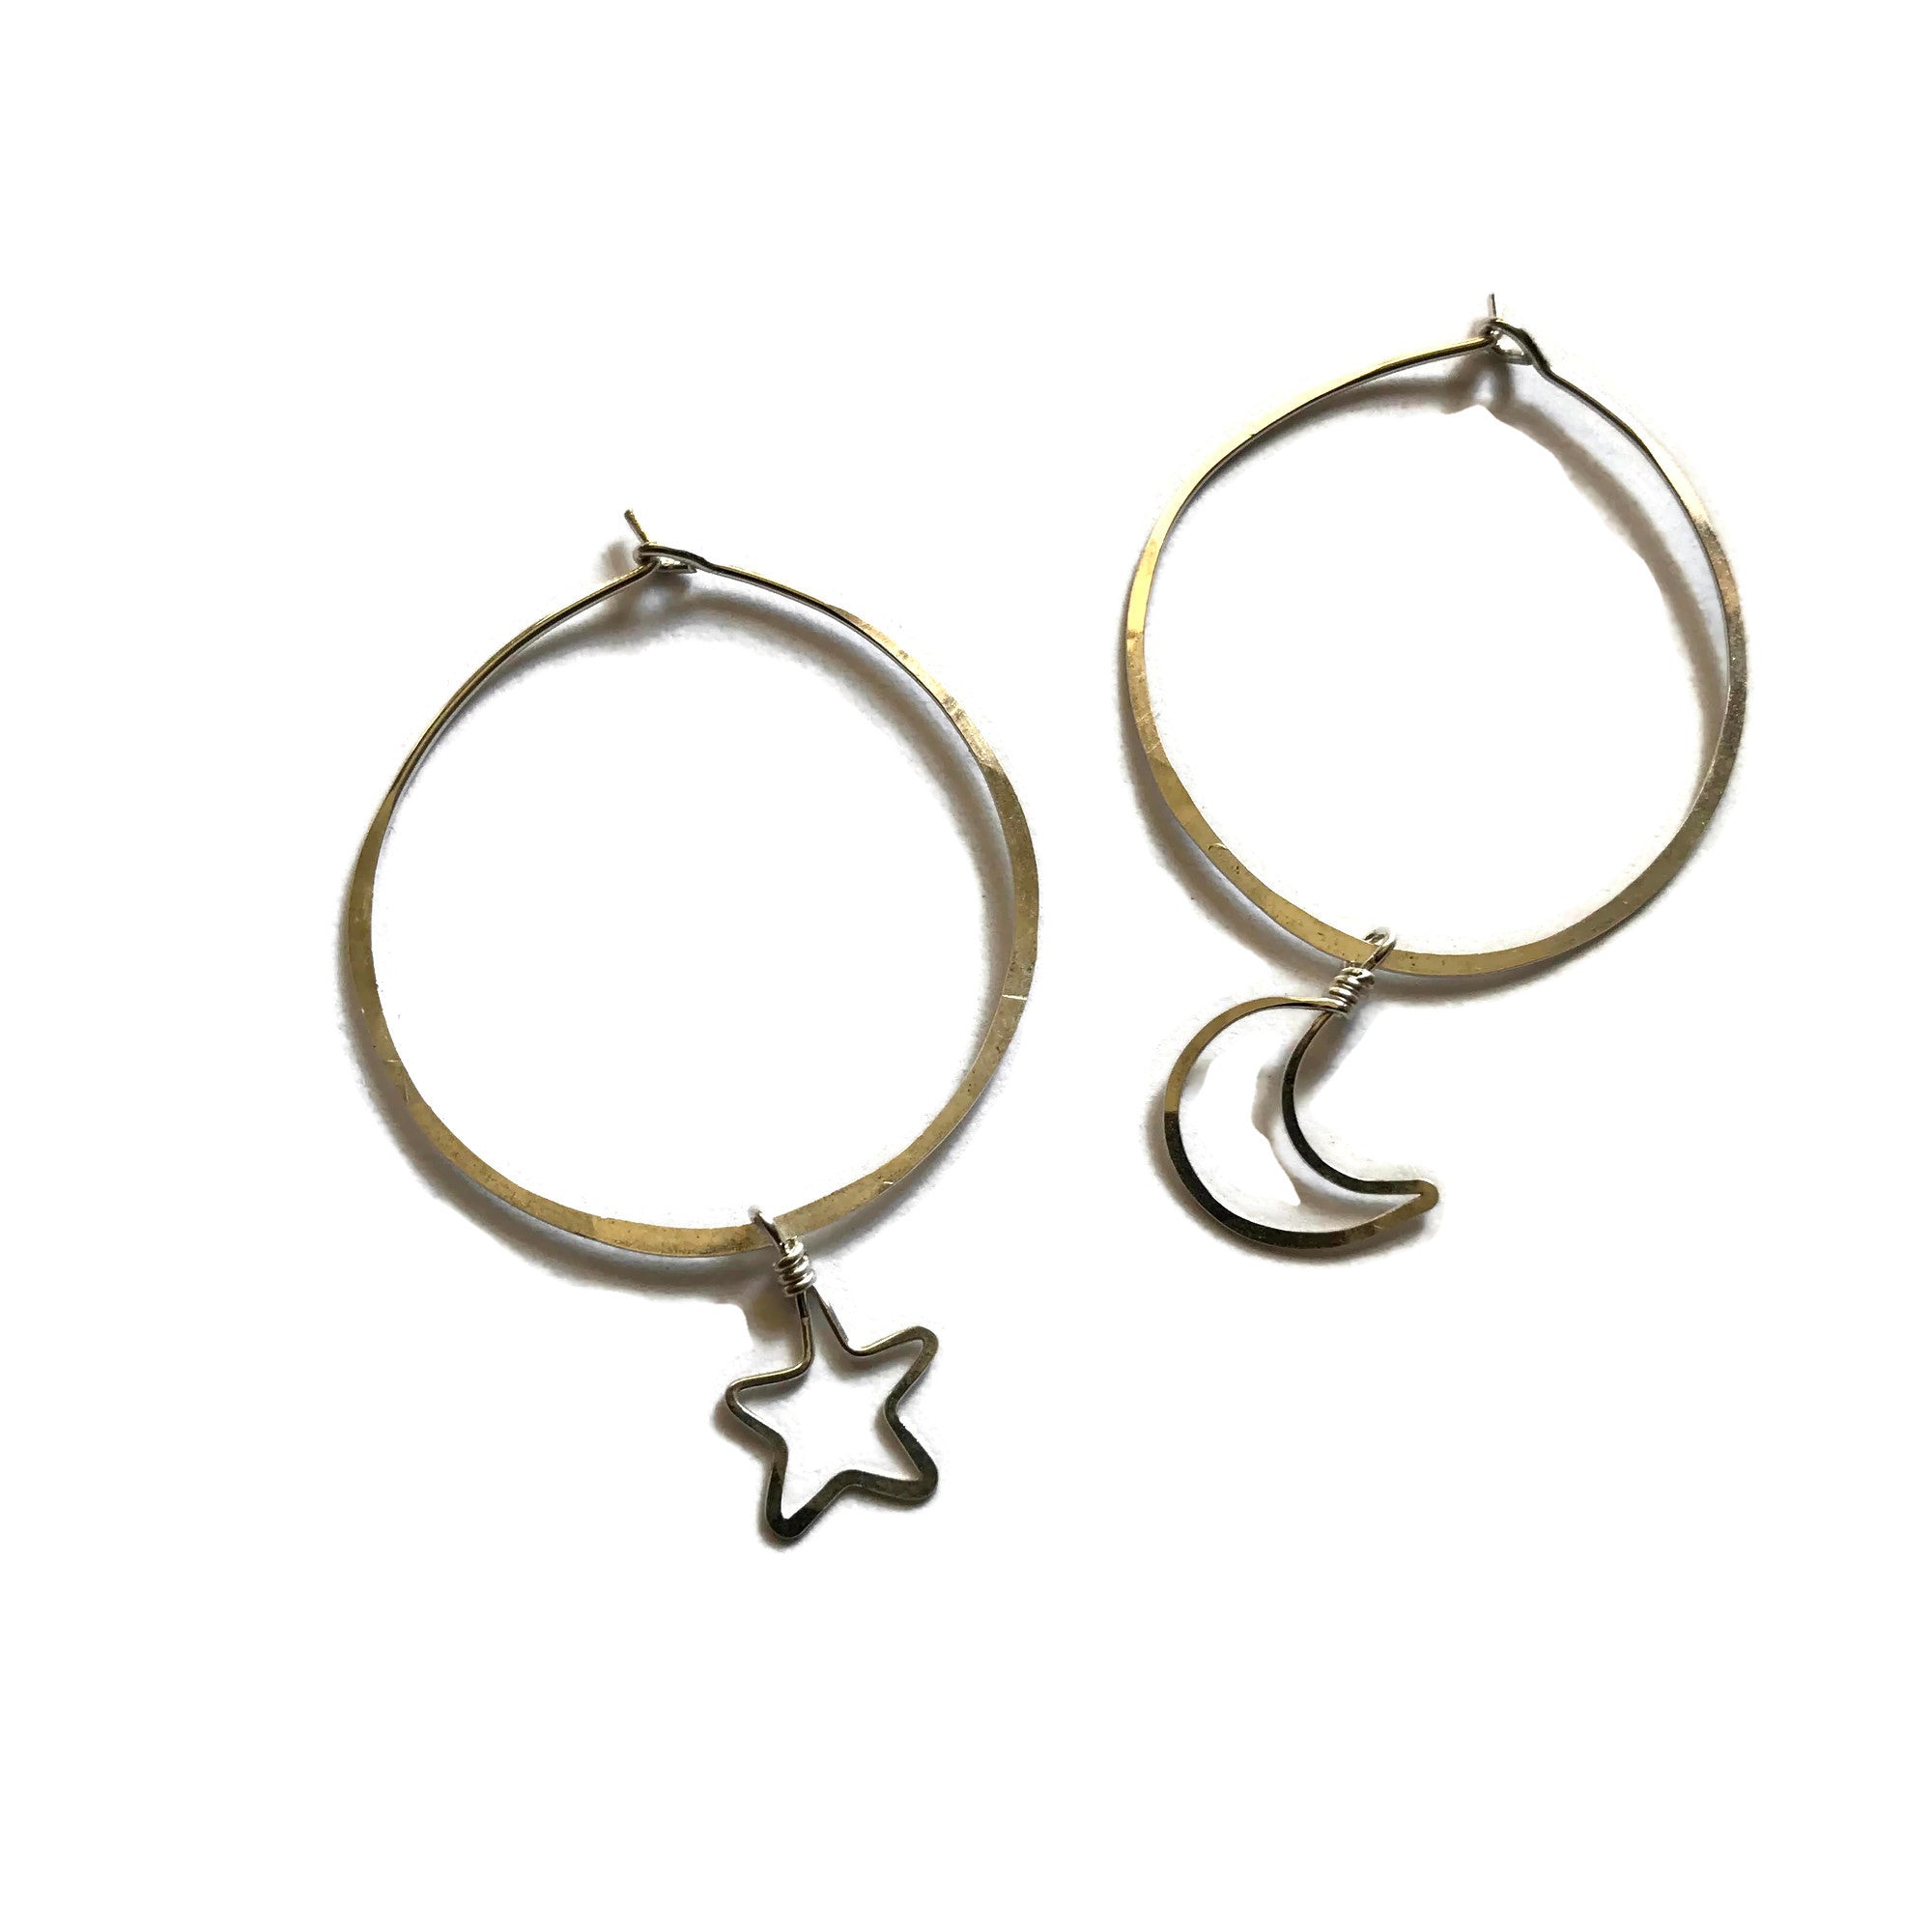 Hammered Hoop Earrings with Crescent Moon & Star